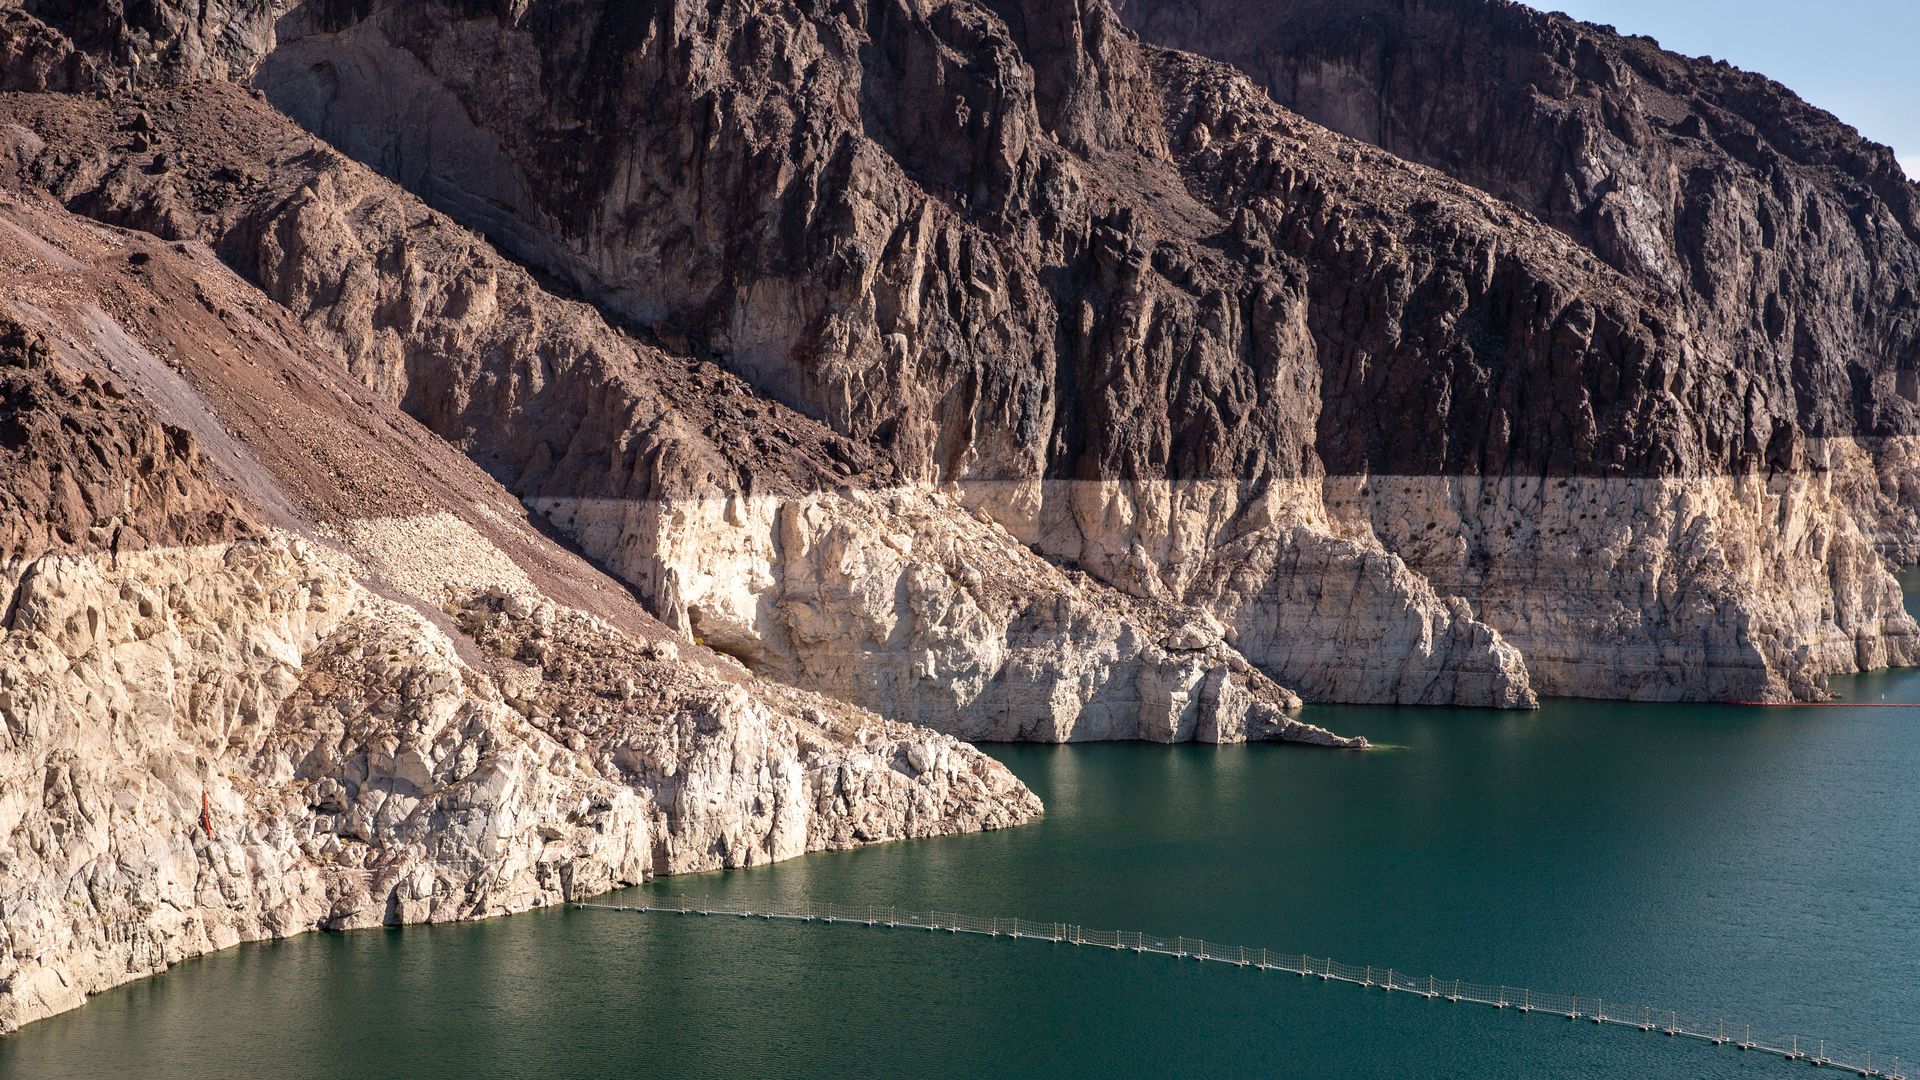 A bathtub ring watermark shows a substantial drop in water levels at Lake Mead